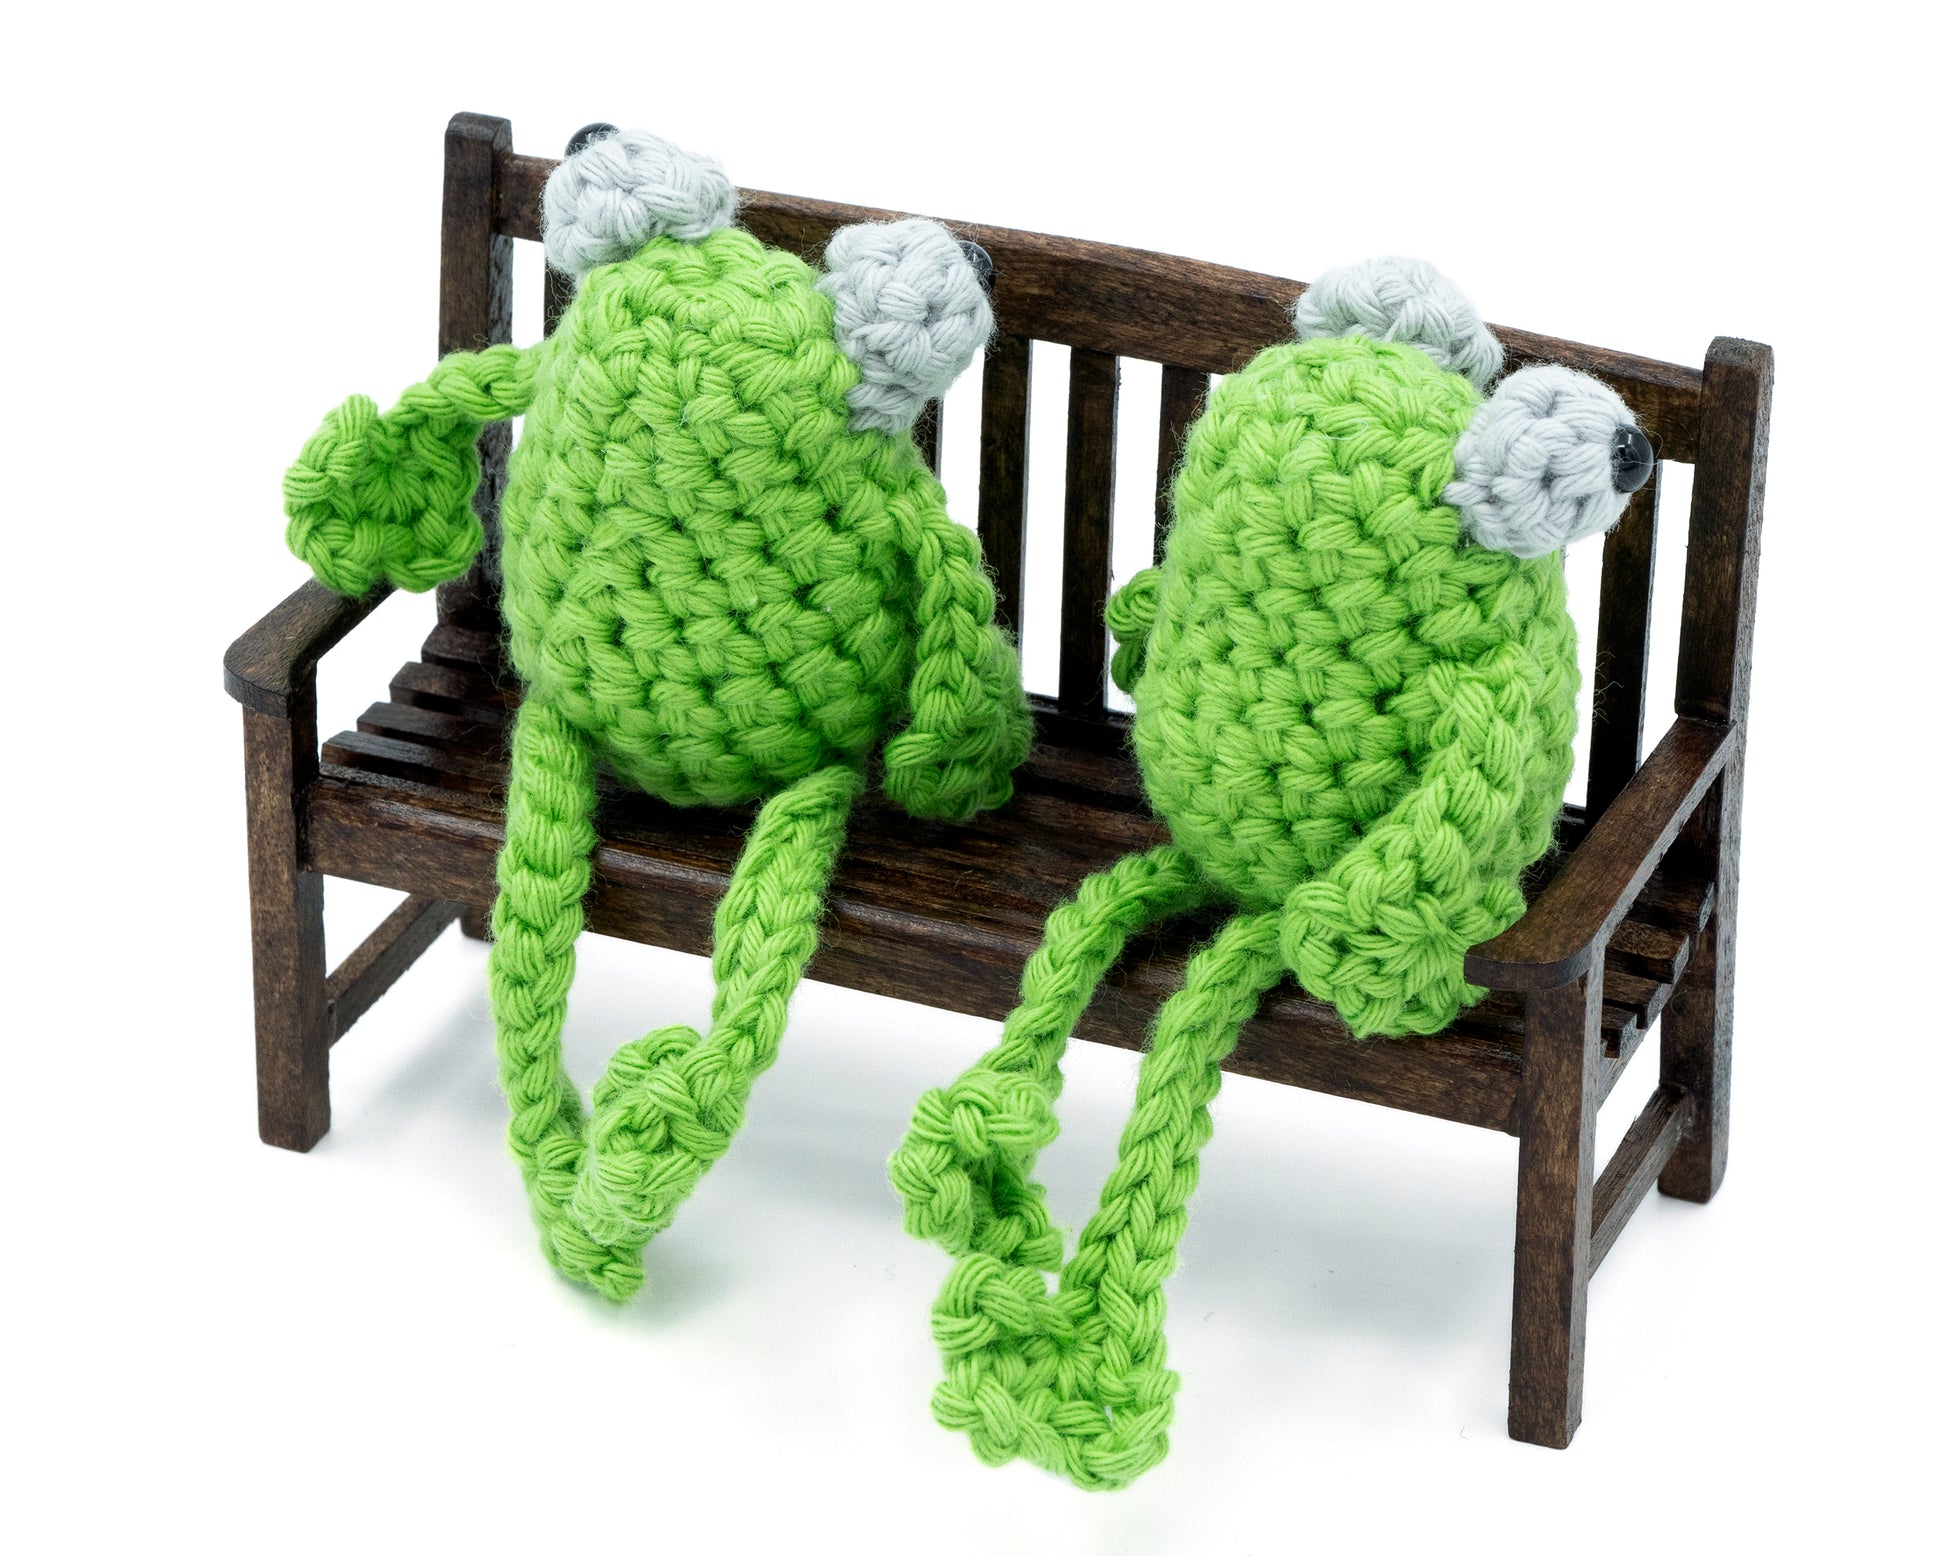 amigurumi crochet tiny frog pattern sitting in on a little bench with a friend